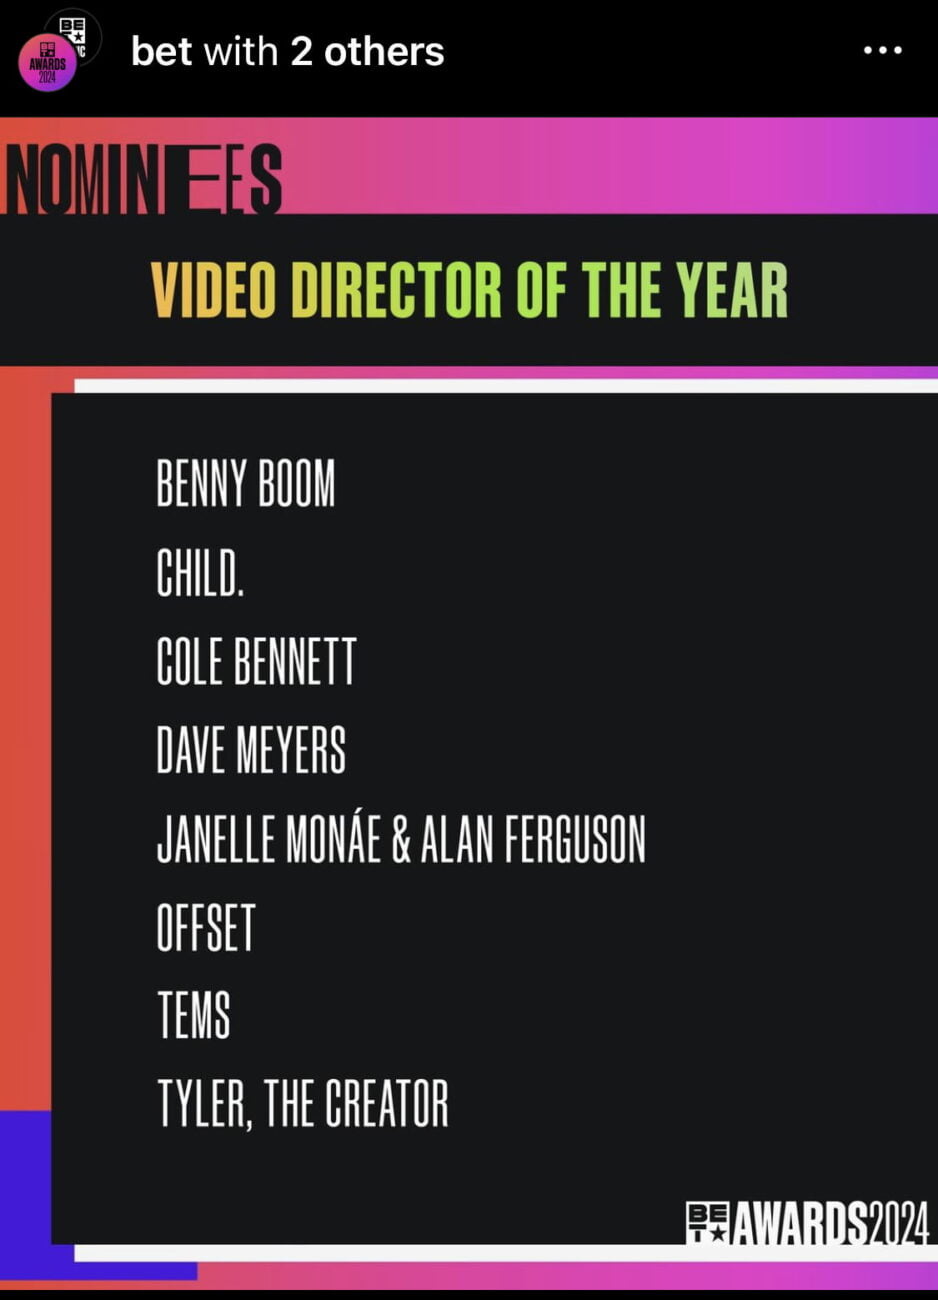 Tems bags nomination for Video Director of the Year.